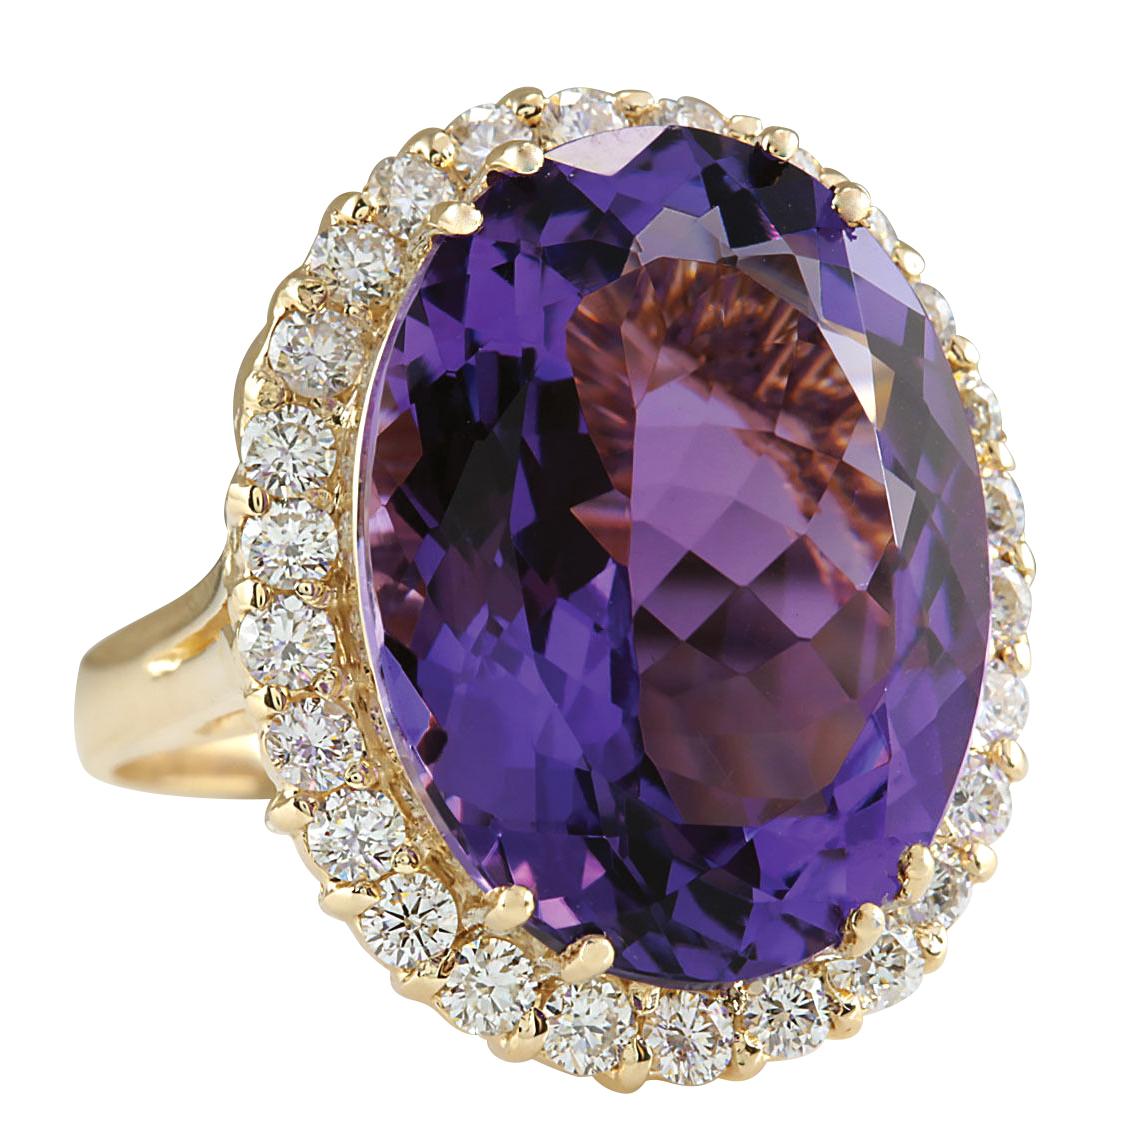 Stamped: 14K Yellow Gold
Total Ring Weight: 8.5 Grams
Total Natural Amethyst Weight is 15.66 Carat (Measures: 20.00x15.00 mm)
Color: Purple
Total Natural Diamond Weight is 1.20 Carat
Color: F-G, Clarity: VS2-SI1
Face Measures: 24.05x19.75 mm
Sku: